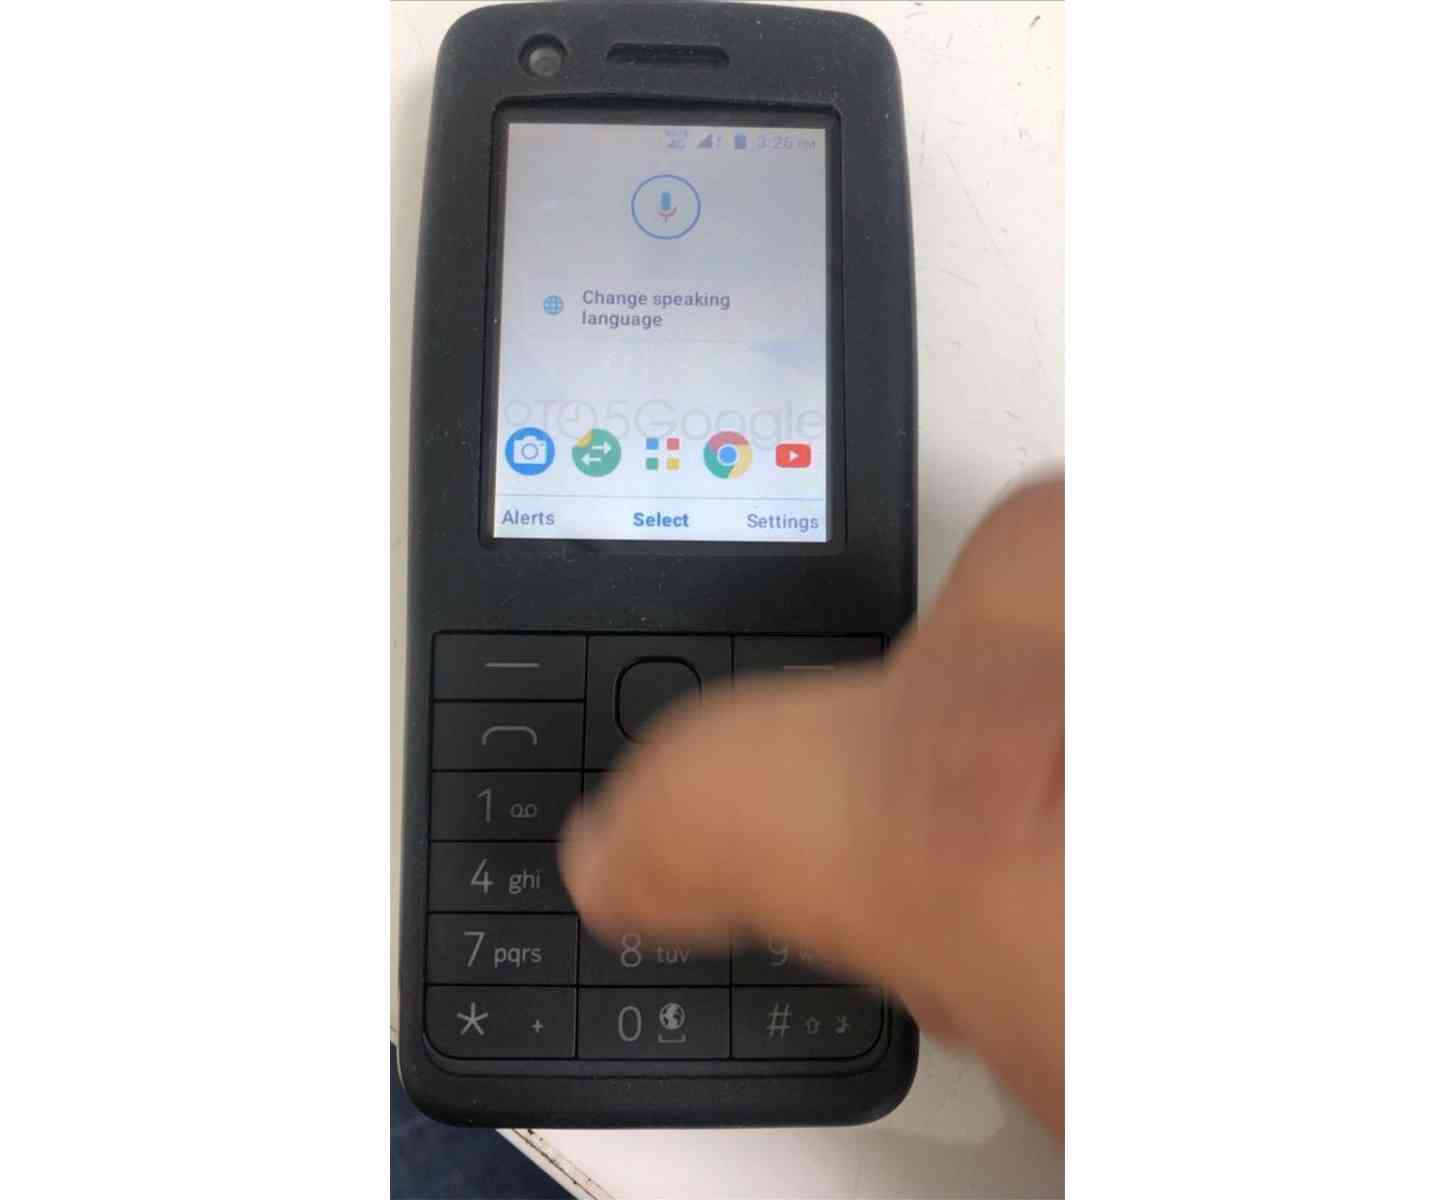 Nokia Android feature phone leaked photo